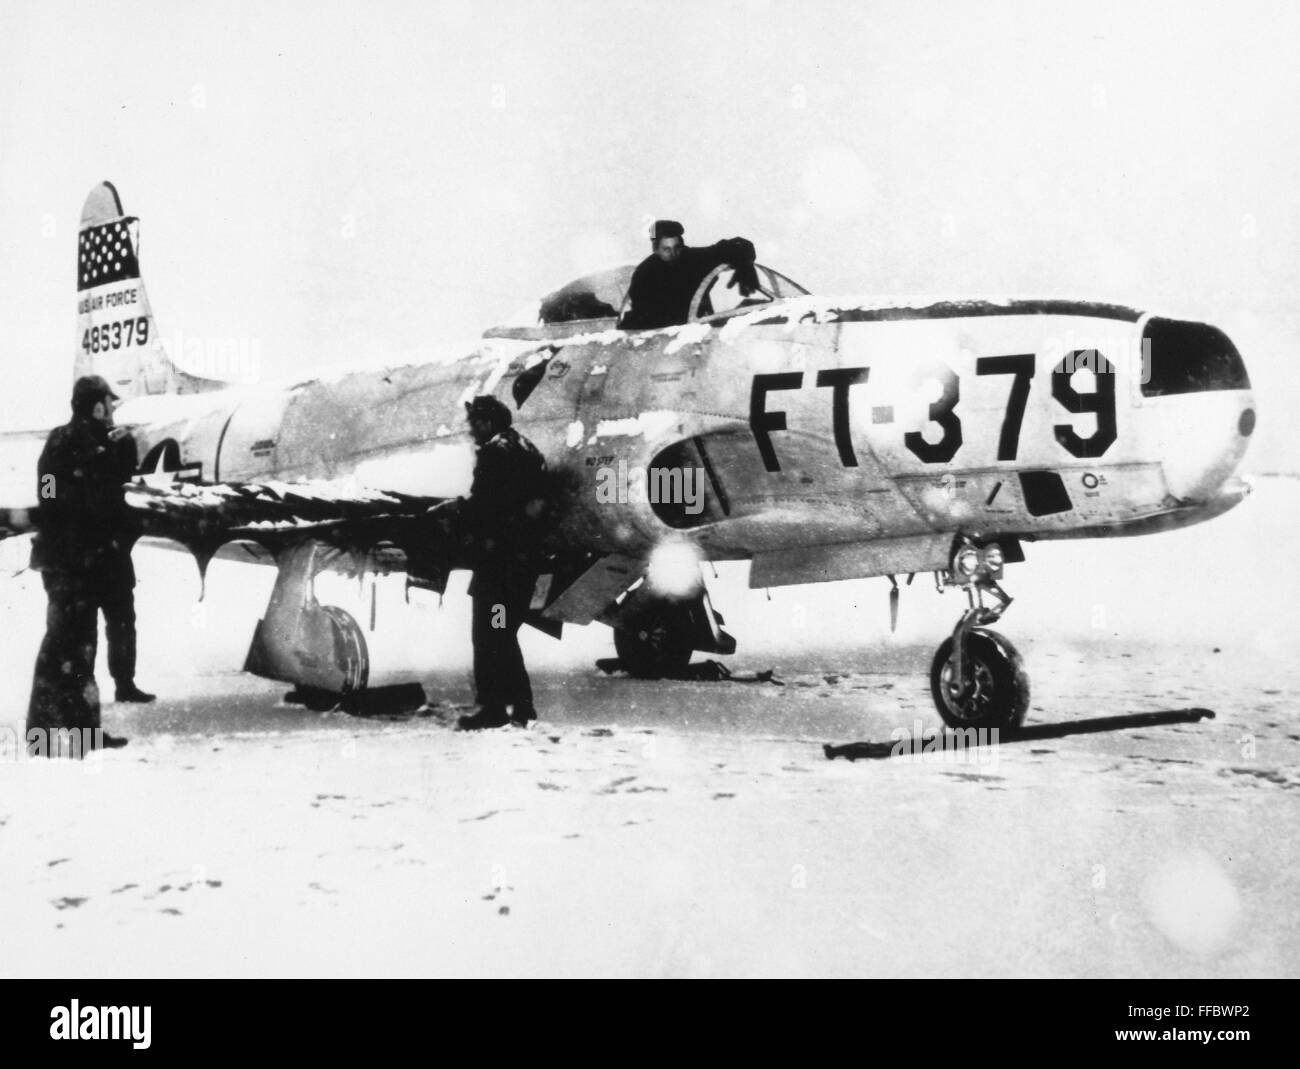 RF-80 'SHOOTING STAR,' 1952. /nGround crewmen of the U.S. Air Force cover an Lockheed RF-80 'Shooting Star' of the 67th Tactical Reconnaissance Wing in a winter storm during the Korean War, 1952. Stock Photo